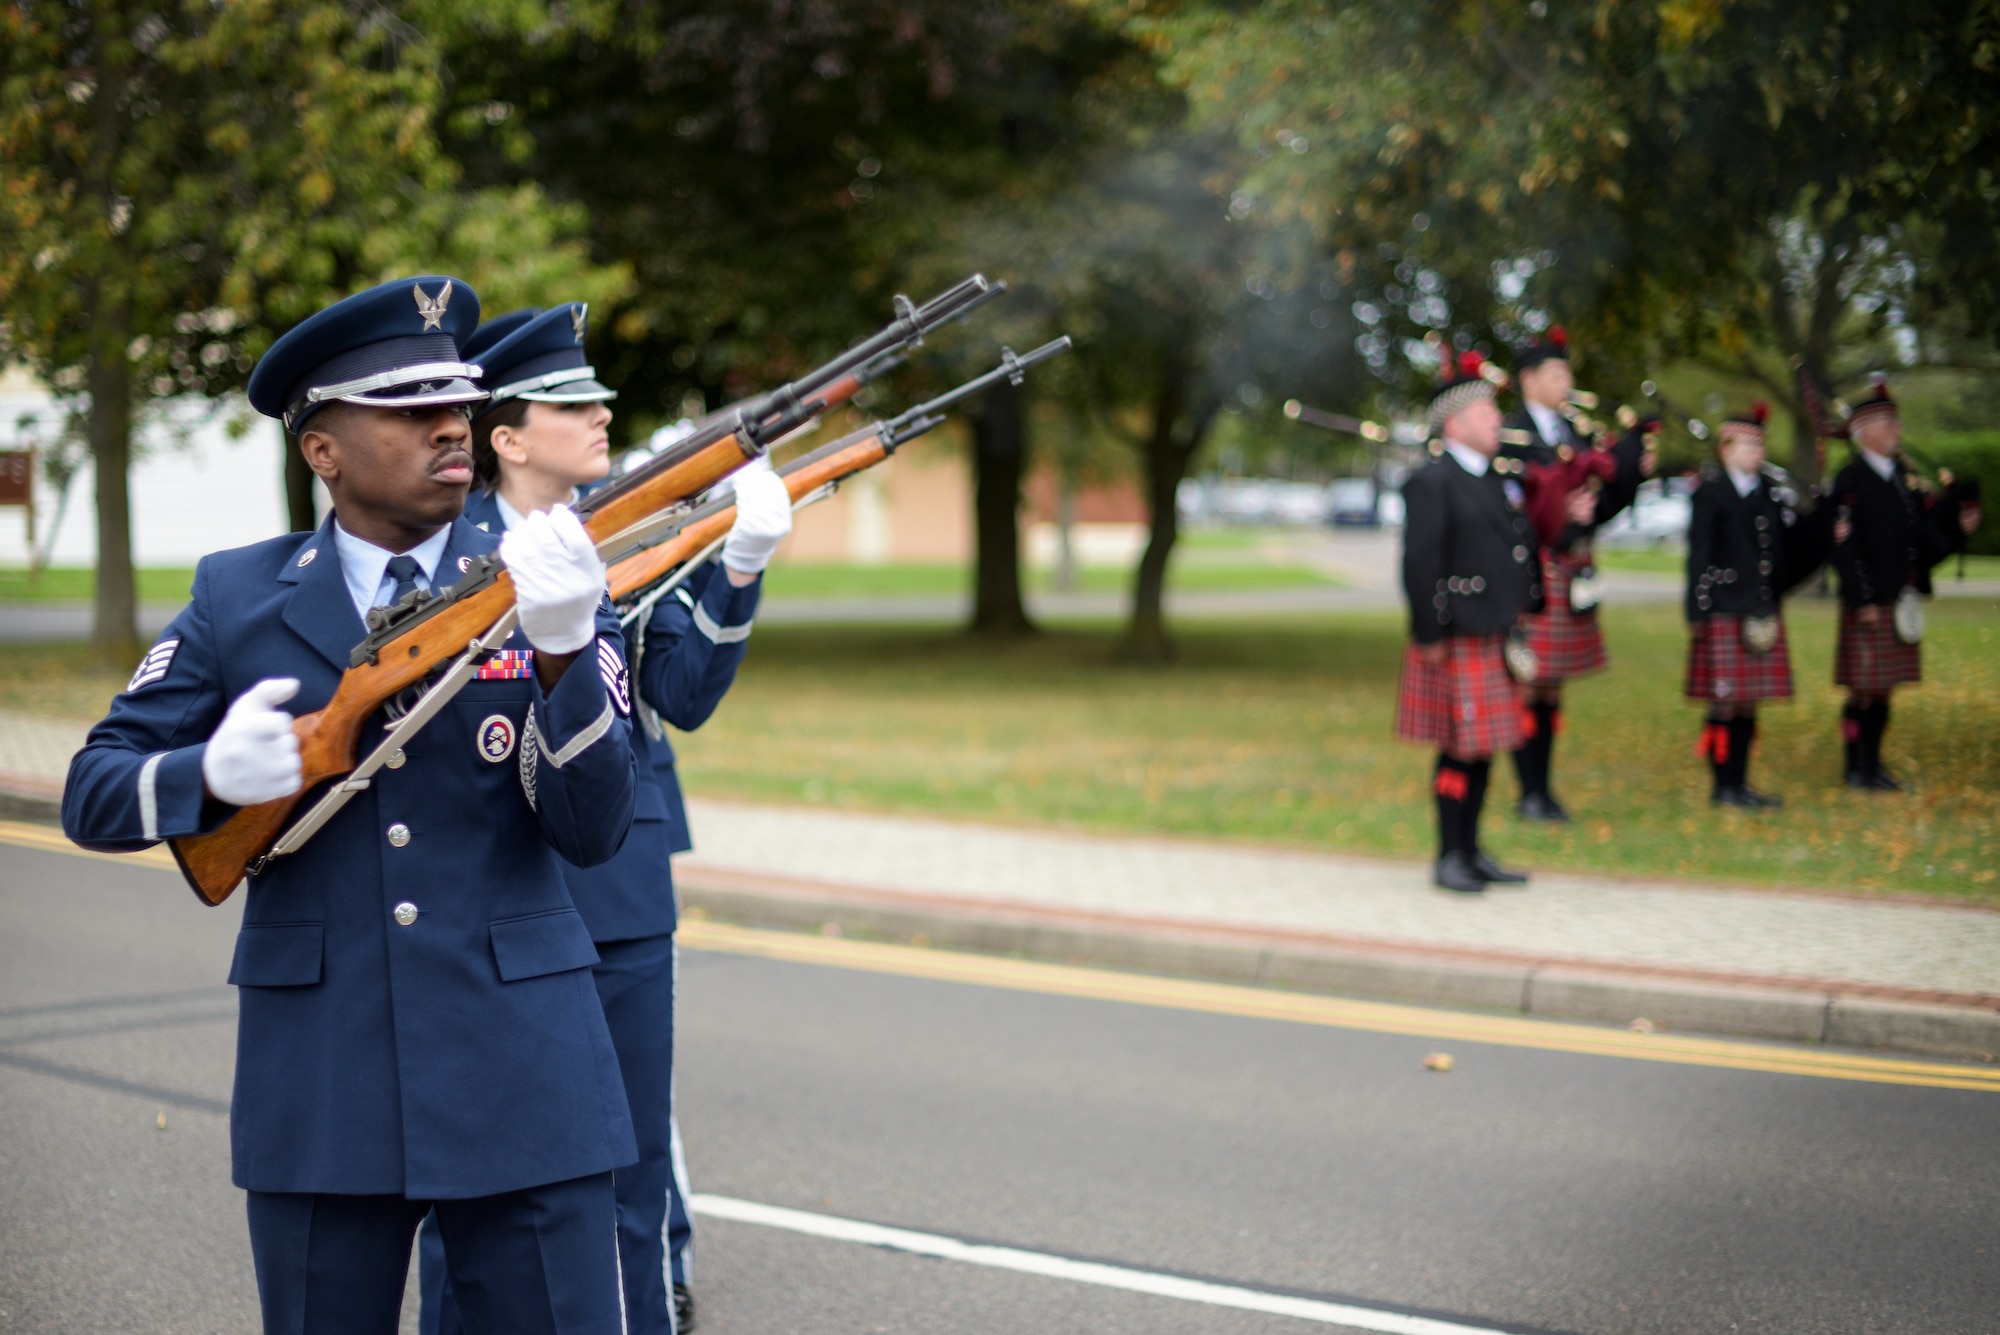 The Team Mildenhall Honor Guard fires a gun salute during a 9/11 ceremony at RAF Mildenhall Sep. 11, 2018. First responders from RAF Mildenhall and RAF Lakenheath attended the ceremony, which marked the 17th anniversary of the Sept. 11 terrorist attacks. (U.S. Air Force photo by Tech. Sgt. Emerson Nuñez)